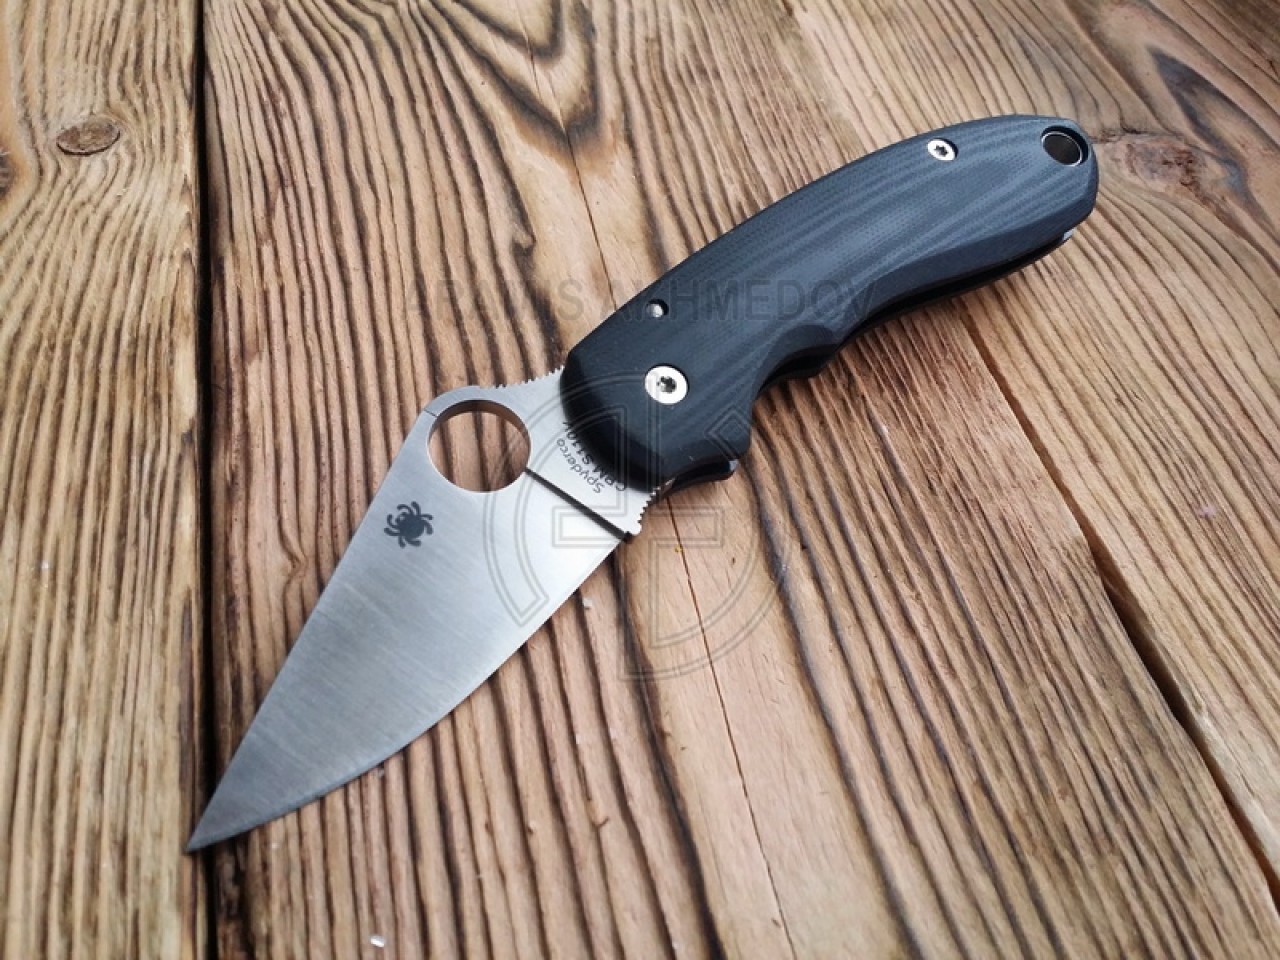 Custome scales, handles SX for Spyderco Para 3 knife